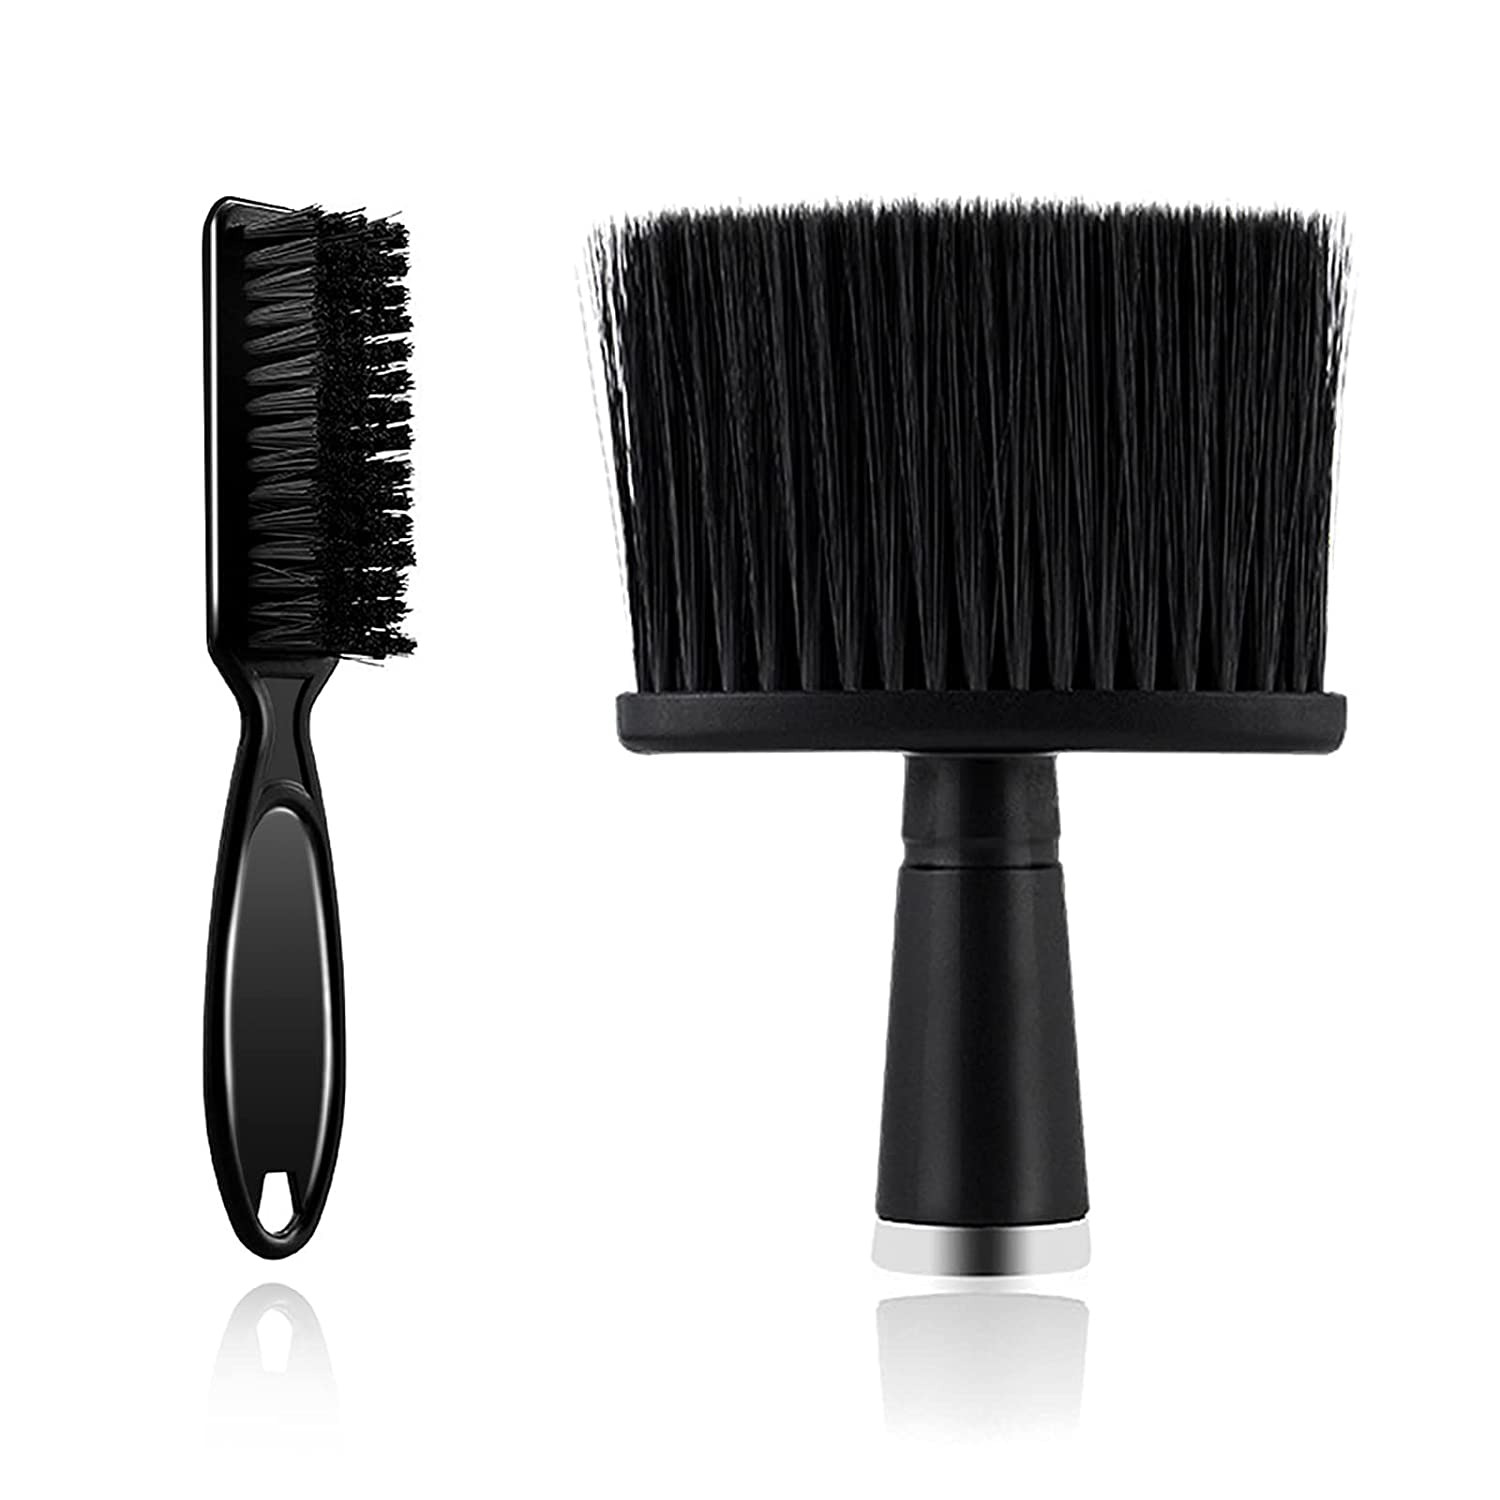 2 Pieces Barber Brush Set, with Barber Blade Cleaning Brush Neck Duster Brush, C